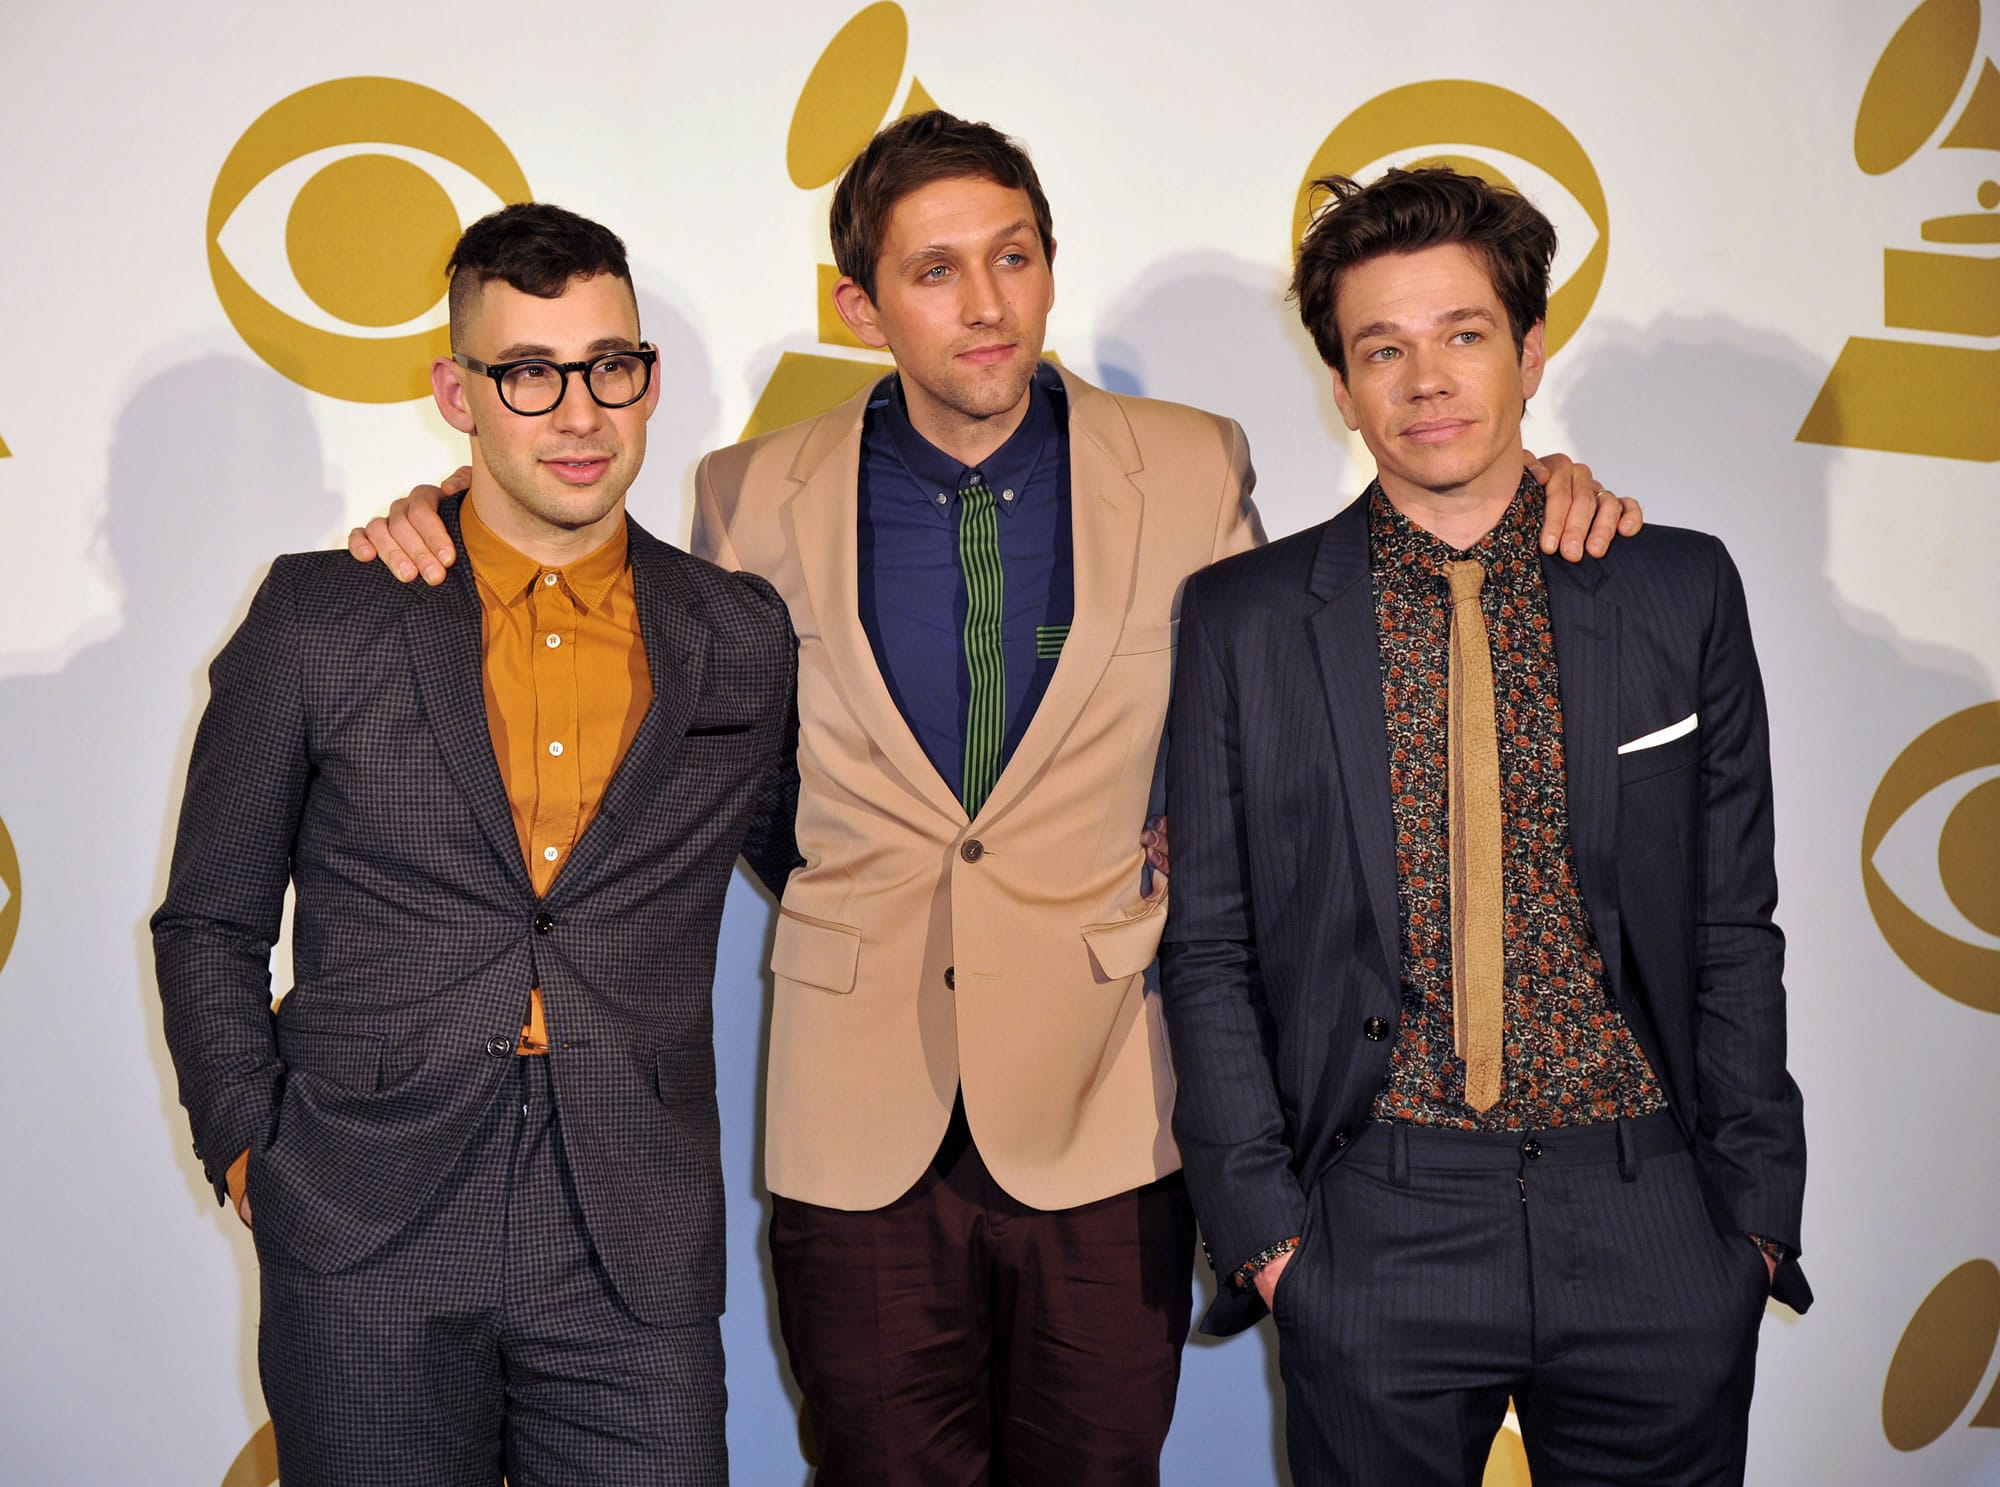 FILE - In this Dec. 5, 2012 file photo, the band fun., from left, Jack Antonoff, Andrew Dost and Nate Ruess pose for a photo backstage at the Grammy Nominations Concert Live! at Bridgestone Arena, in Nashville, Tenn. The band is up for six Grammy Awards, including the top four categories: album, song and record of the year, and best new artist. Their current tour wraps in Nashville, Tenn., on Feb. 16, 2013.